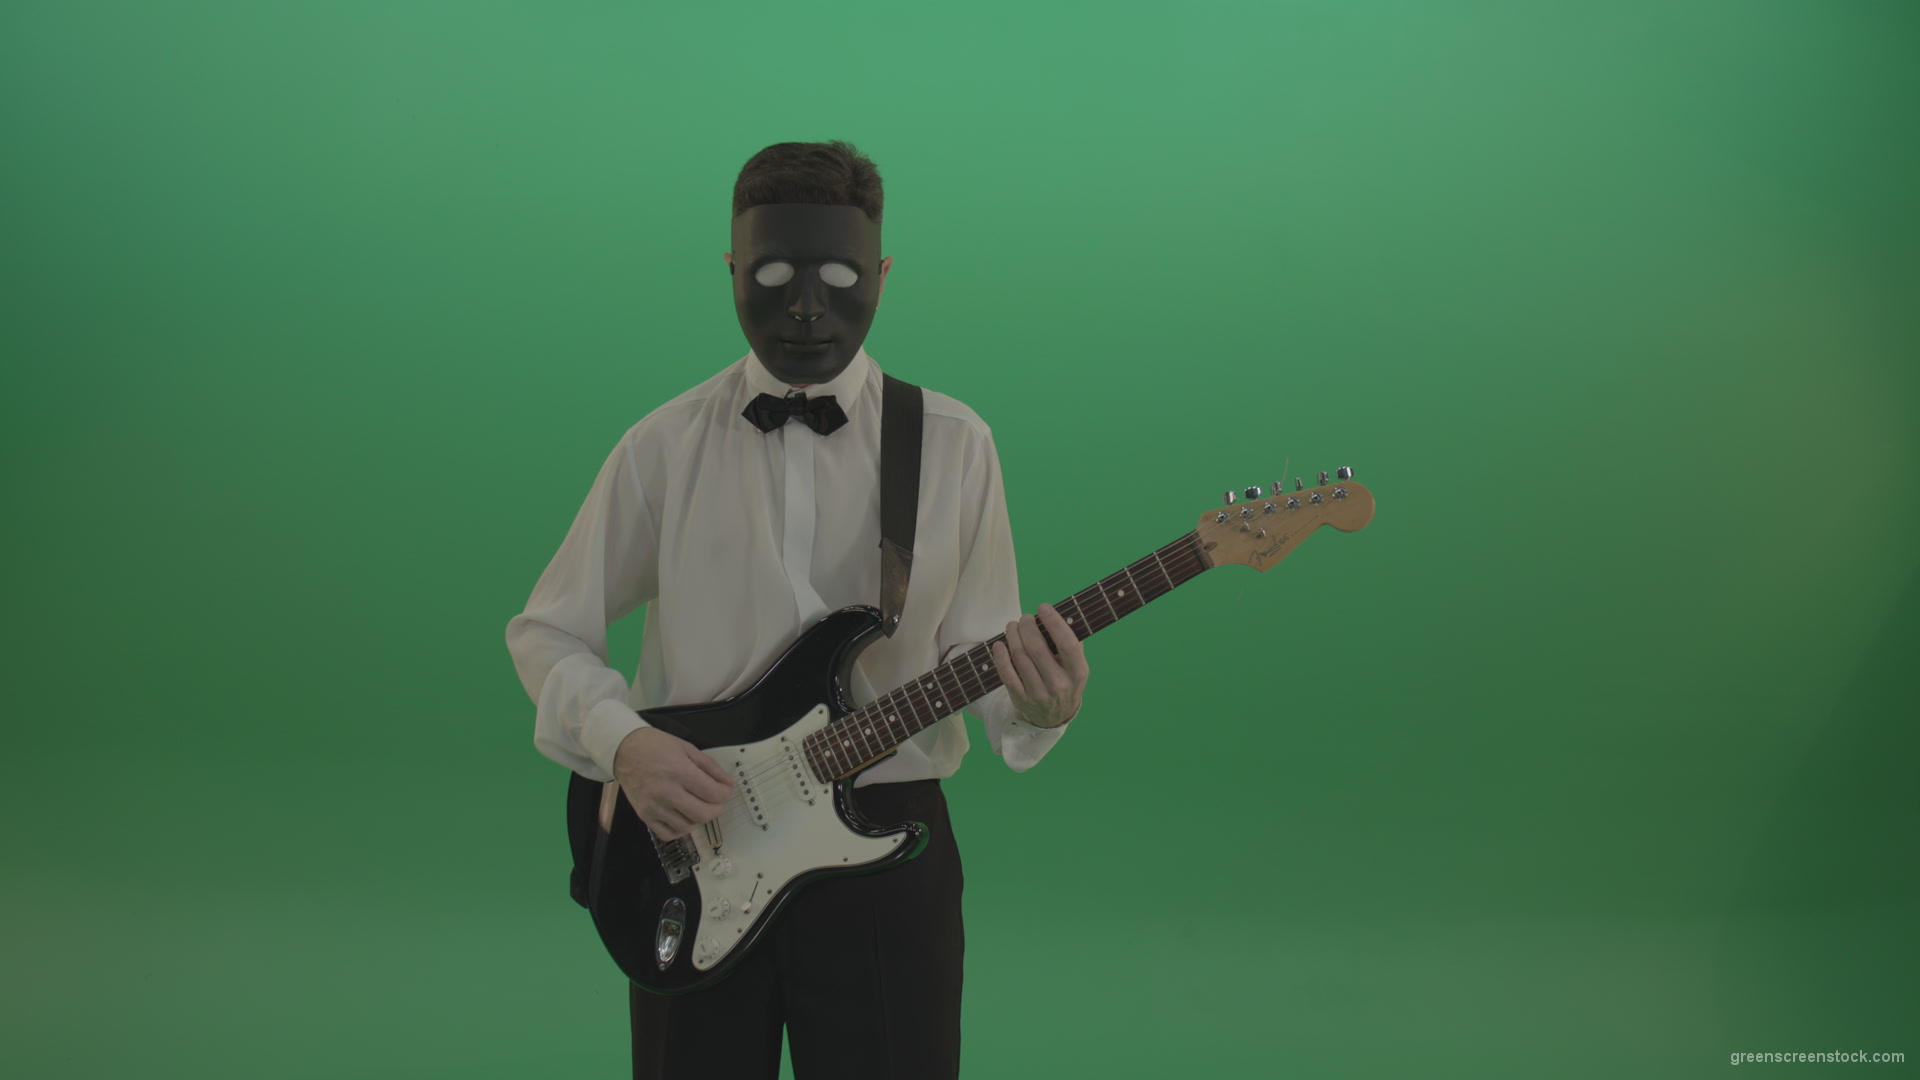 Horror-classic-guitarist-man-in-black-mask-and-white-shirt-play-guitar-on-green-screen_004 Green Screen Stock